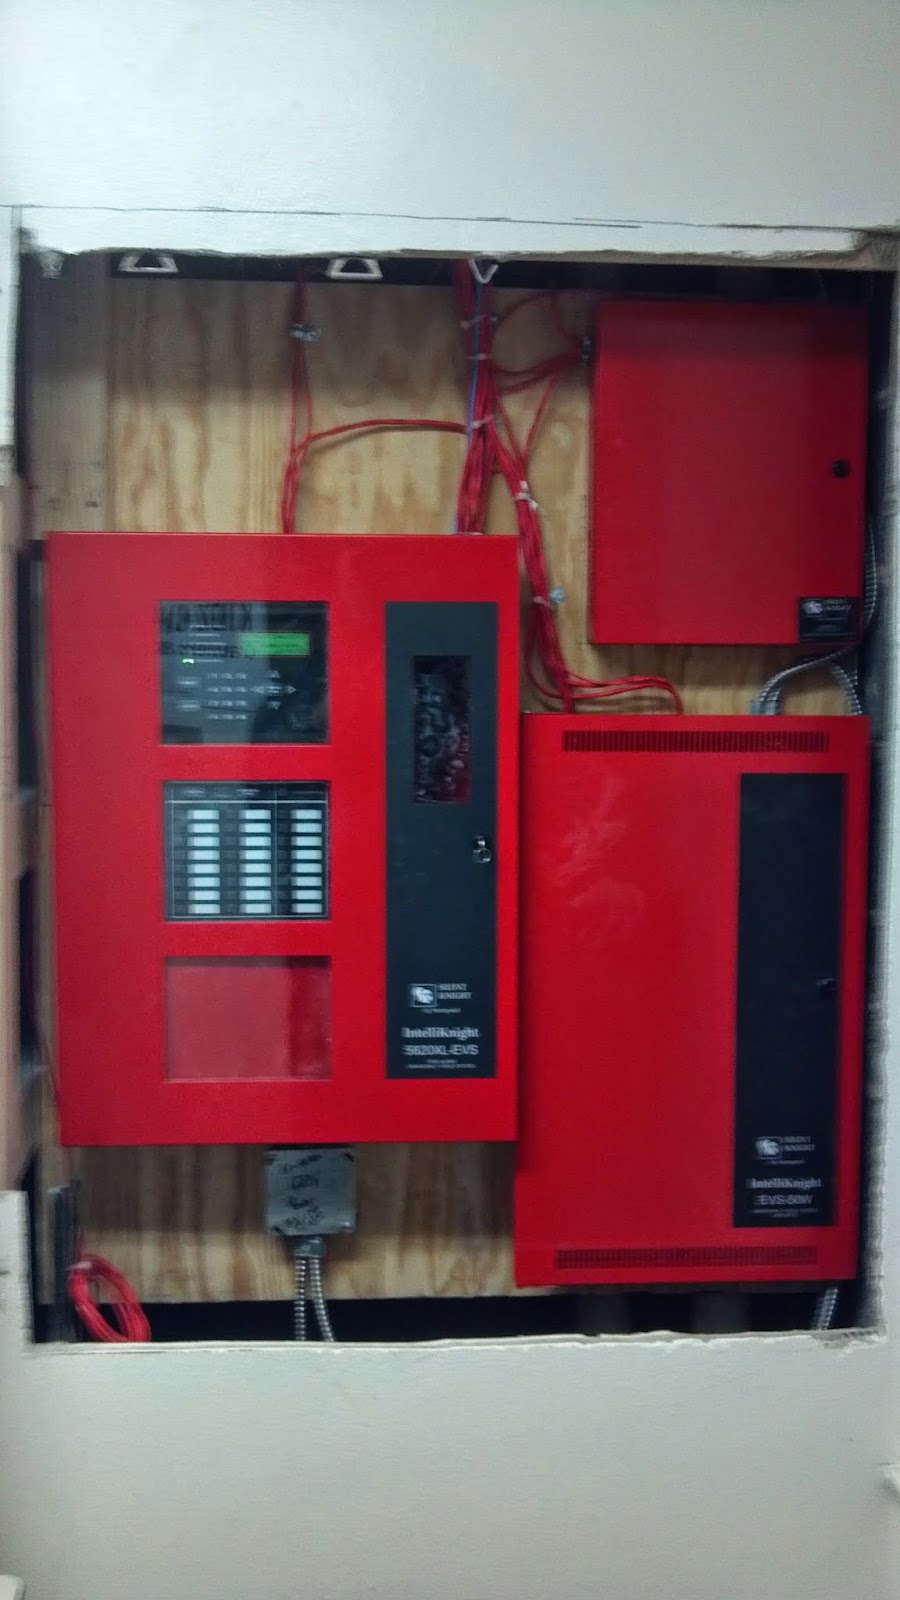 Nick's Fire - Electrical- Safety & Security Blog: Silent Knights new